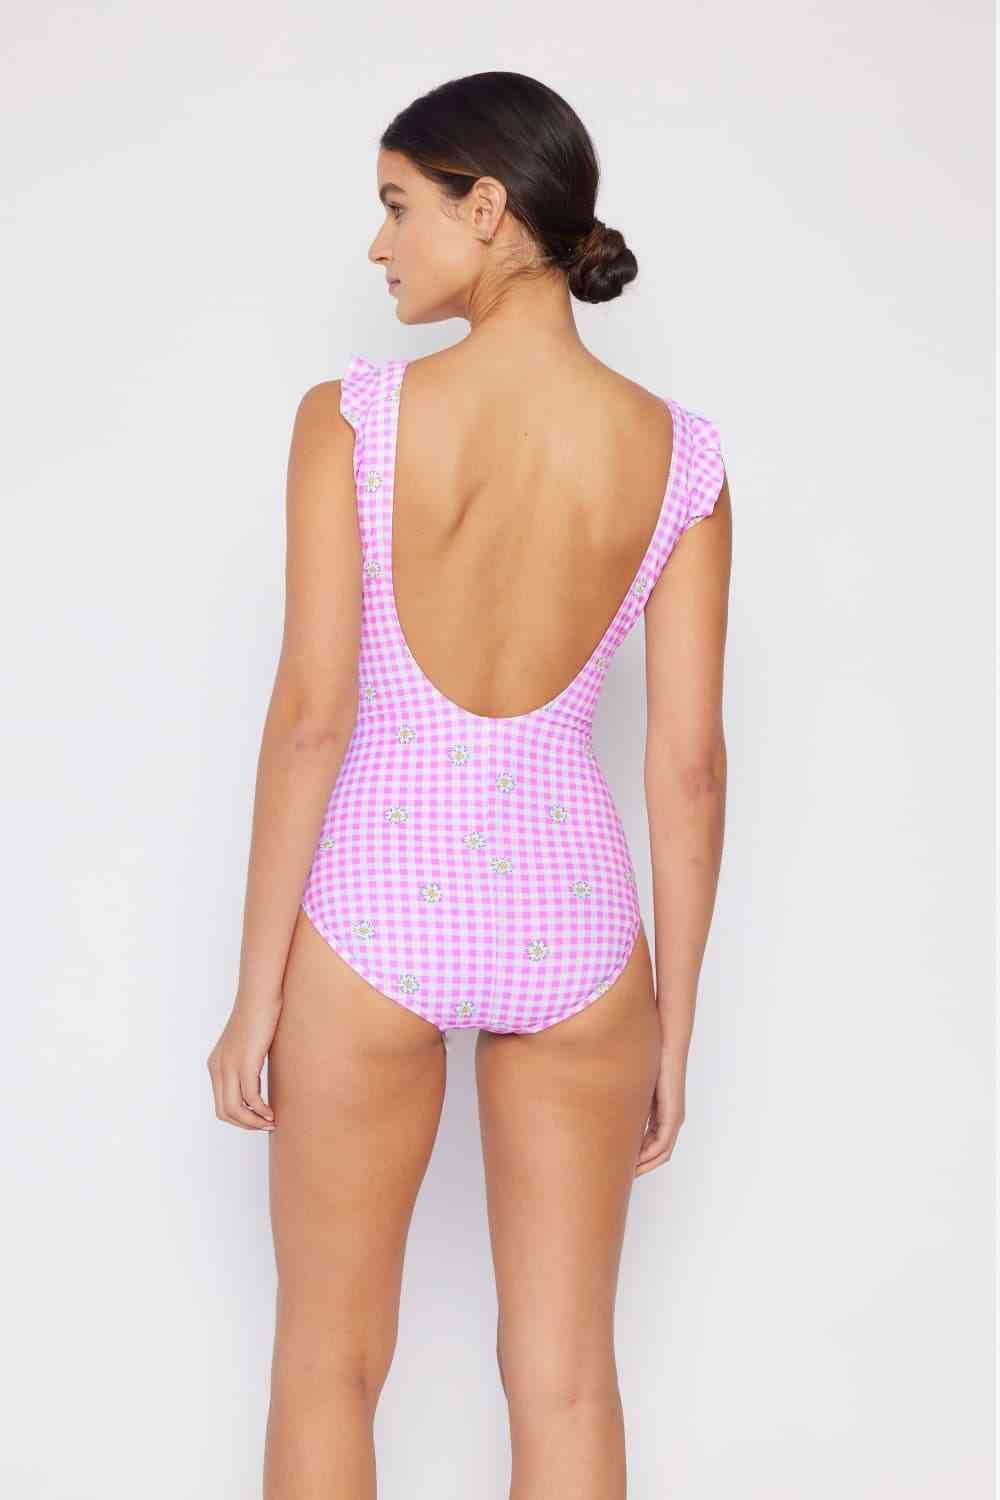 SAYFUT Women's One Pieces Swimsuit Flounce Polka Dot Printed